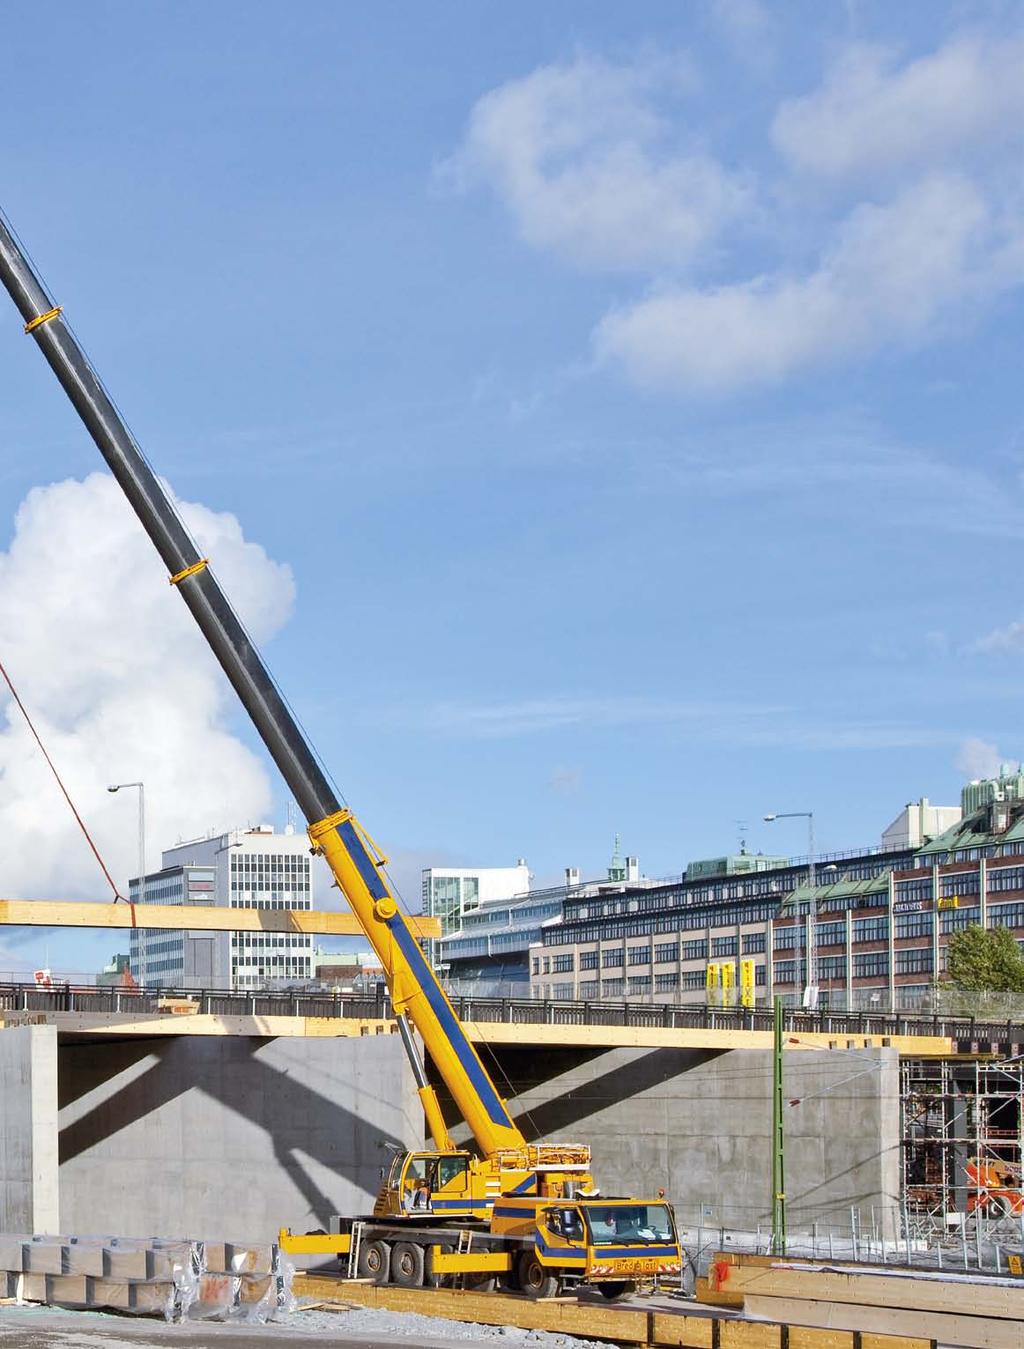 A long telescopic boom, high capacities, an extraordinary mobility as well as a comprehensive comfort and safety configuration distinguish the mobile crane LTM 1100-5.2 from Liebherr.